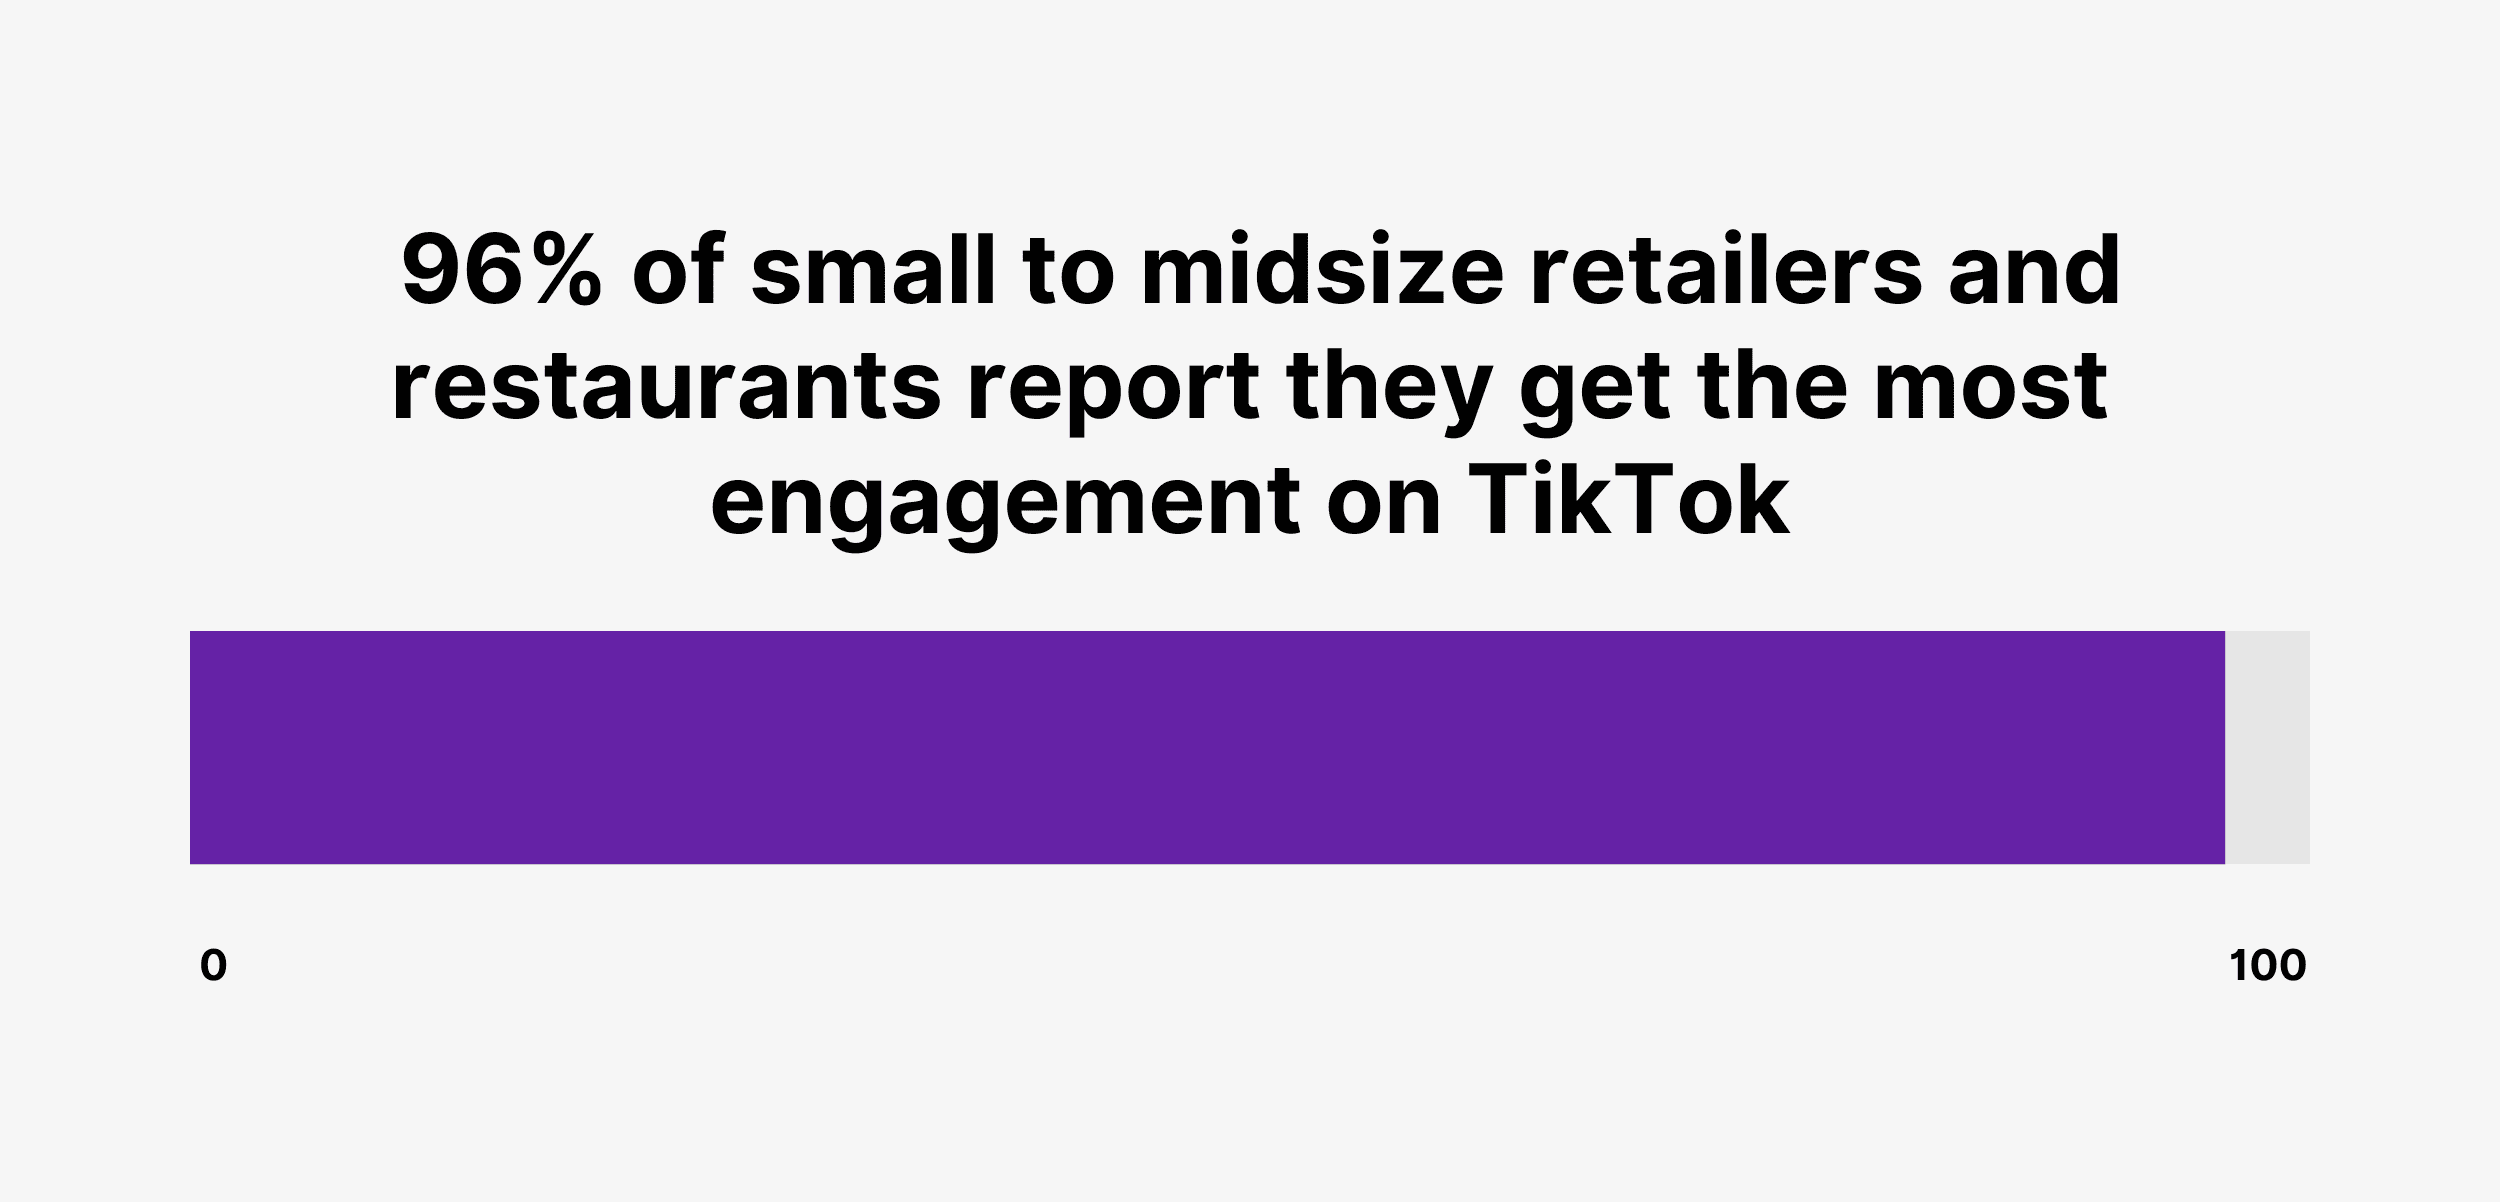 96% of midsize retailers and restaurants report they get the most engagement on TikTok